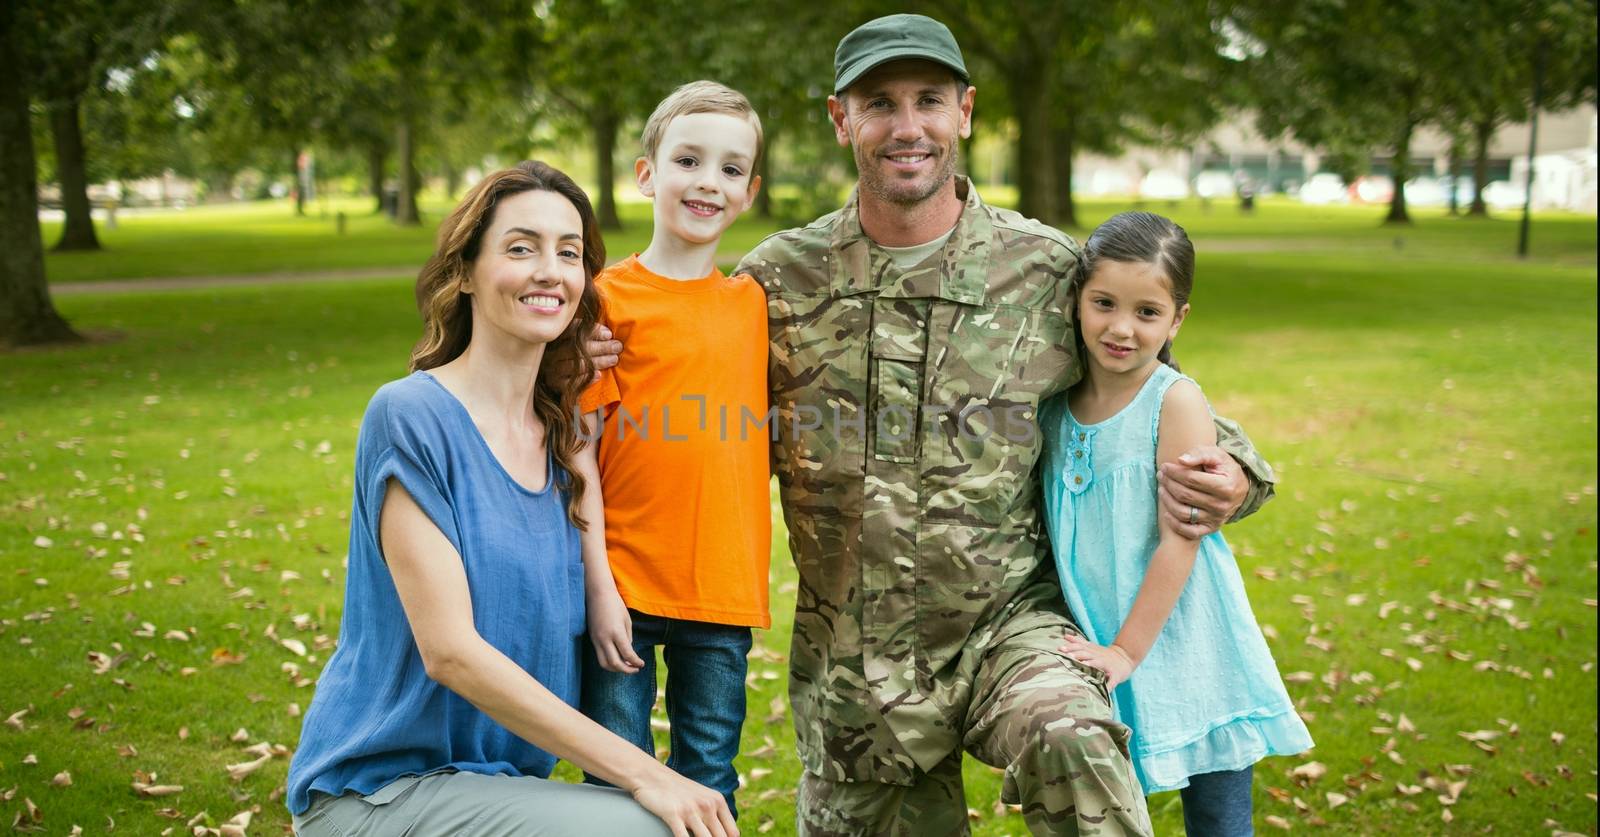 Soldier reunited with their family by Wavebreakmedia